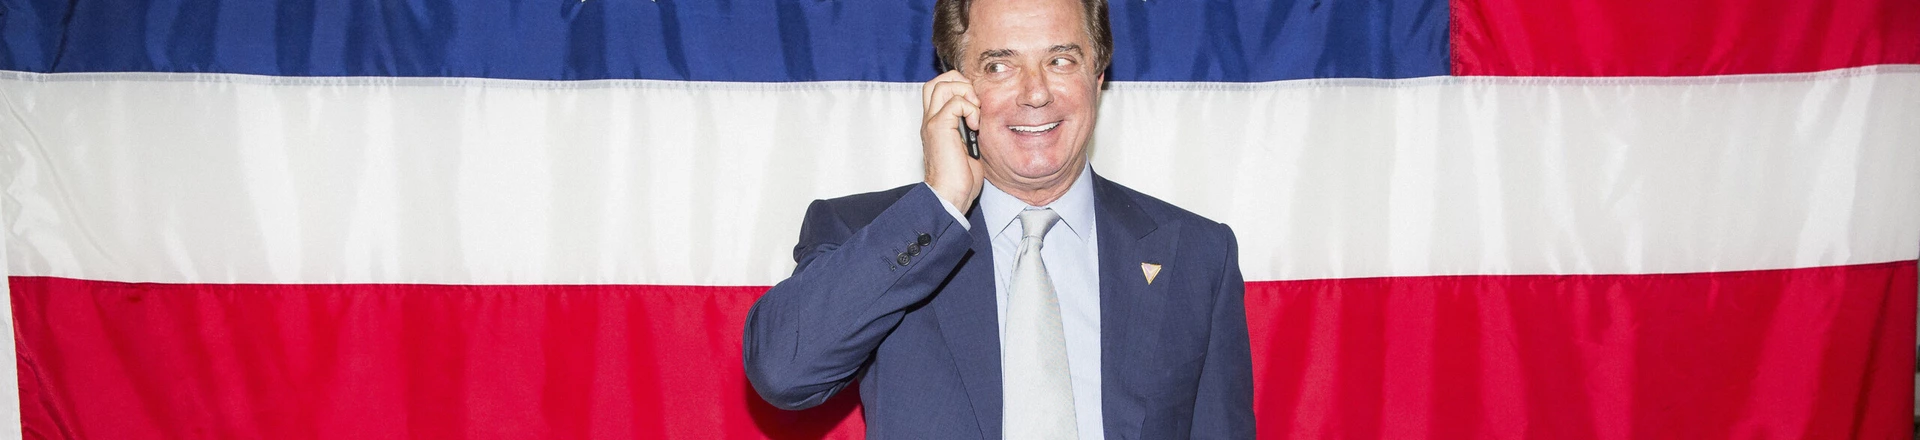 FILE -- Paul Manafort, Donald Trump's former campaign manager, in New York, May 4,  2016. A shell company created by Manafort the day he resigned as campaign manager received $13 million in loans from two businesses with ties to Trump, which appear to be part of an effort by Manafort to stave off a personal financial crisis. (Damon Winter/ The New York Times)